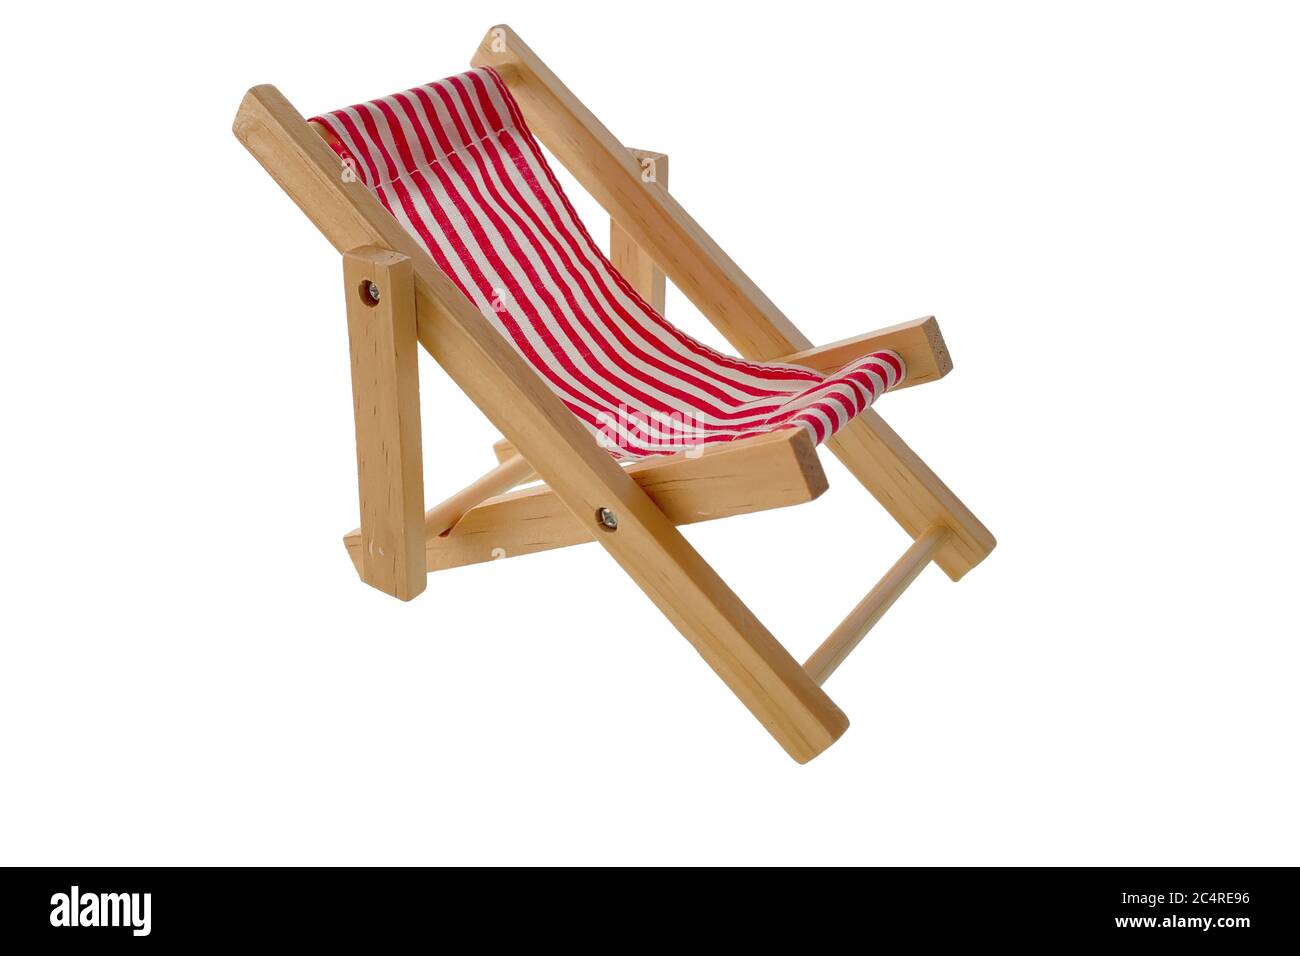 wooden red striped deck chair, isolated on white background Stock Photo